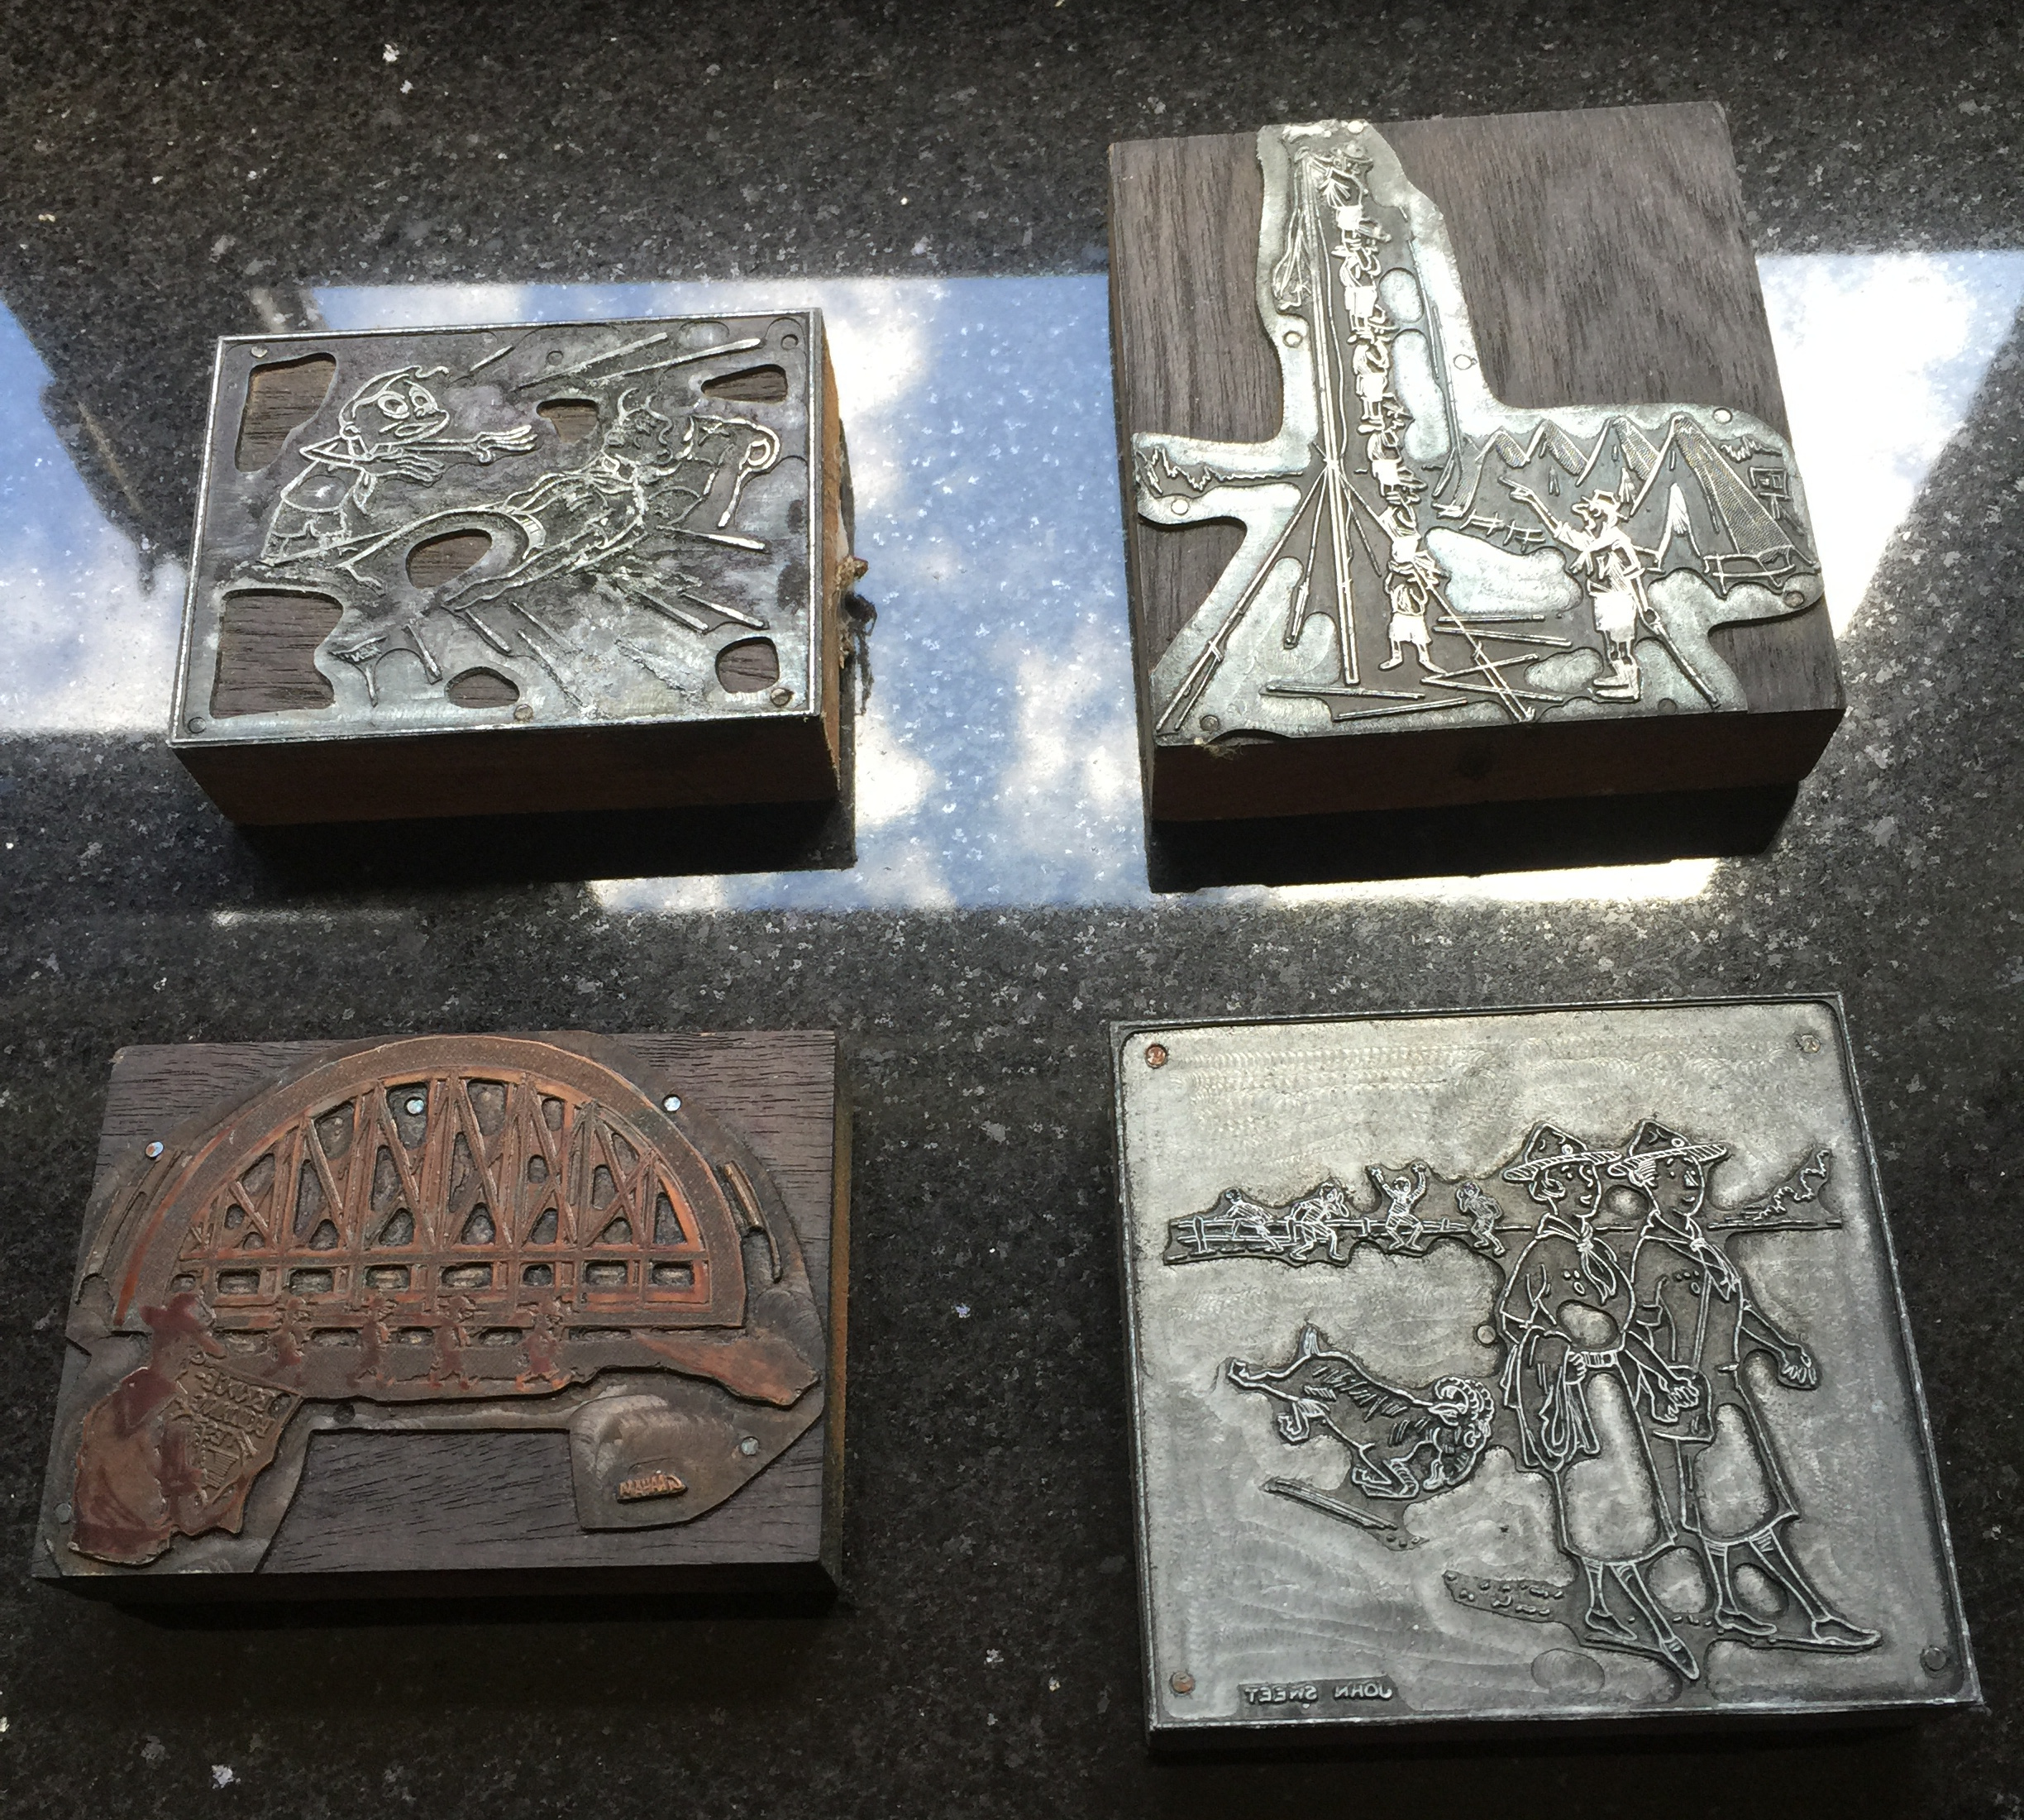 4 engraved metal pieces mounted on wood depicting in inverse different Scouting scenes.